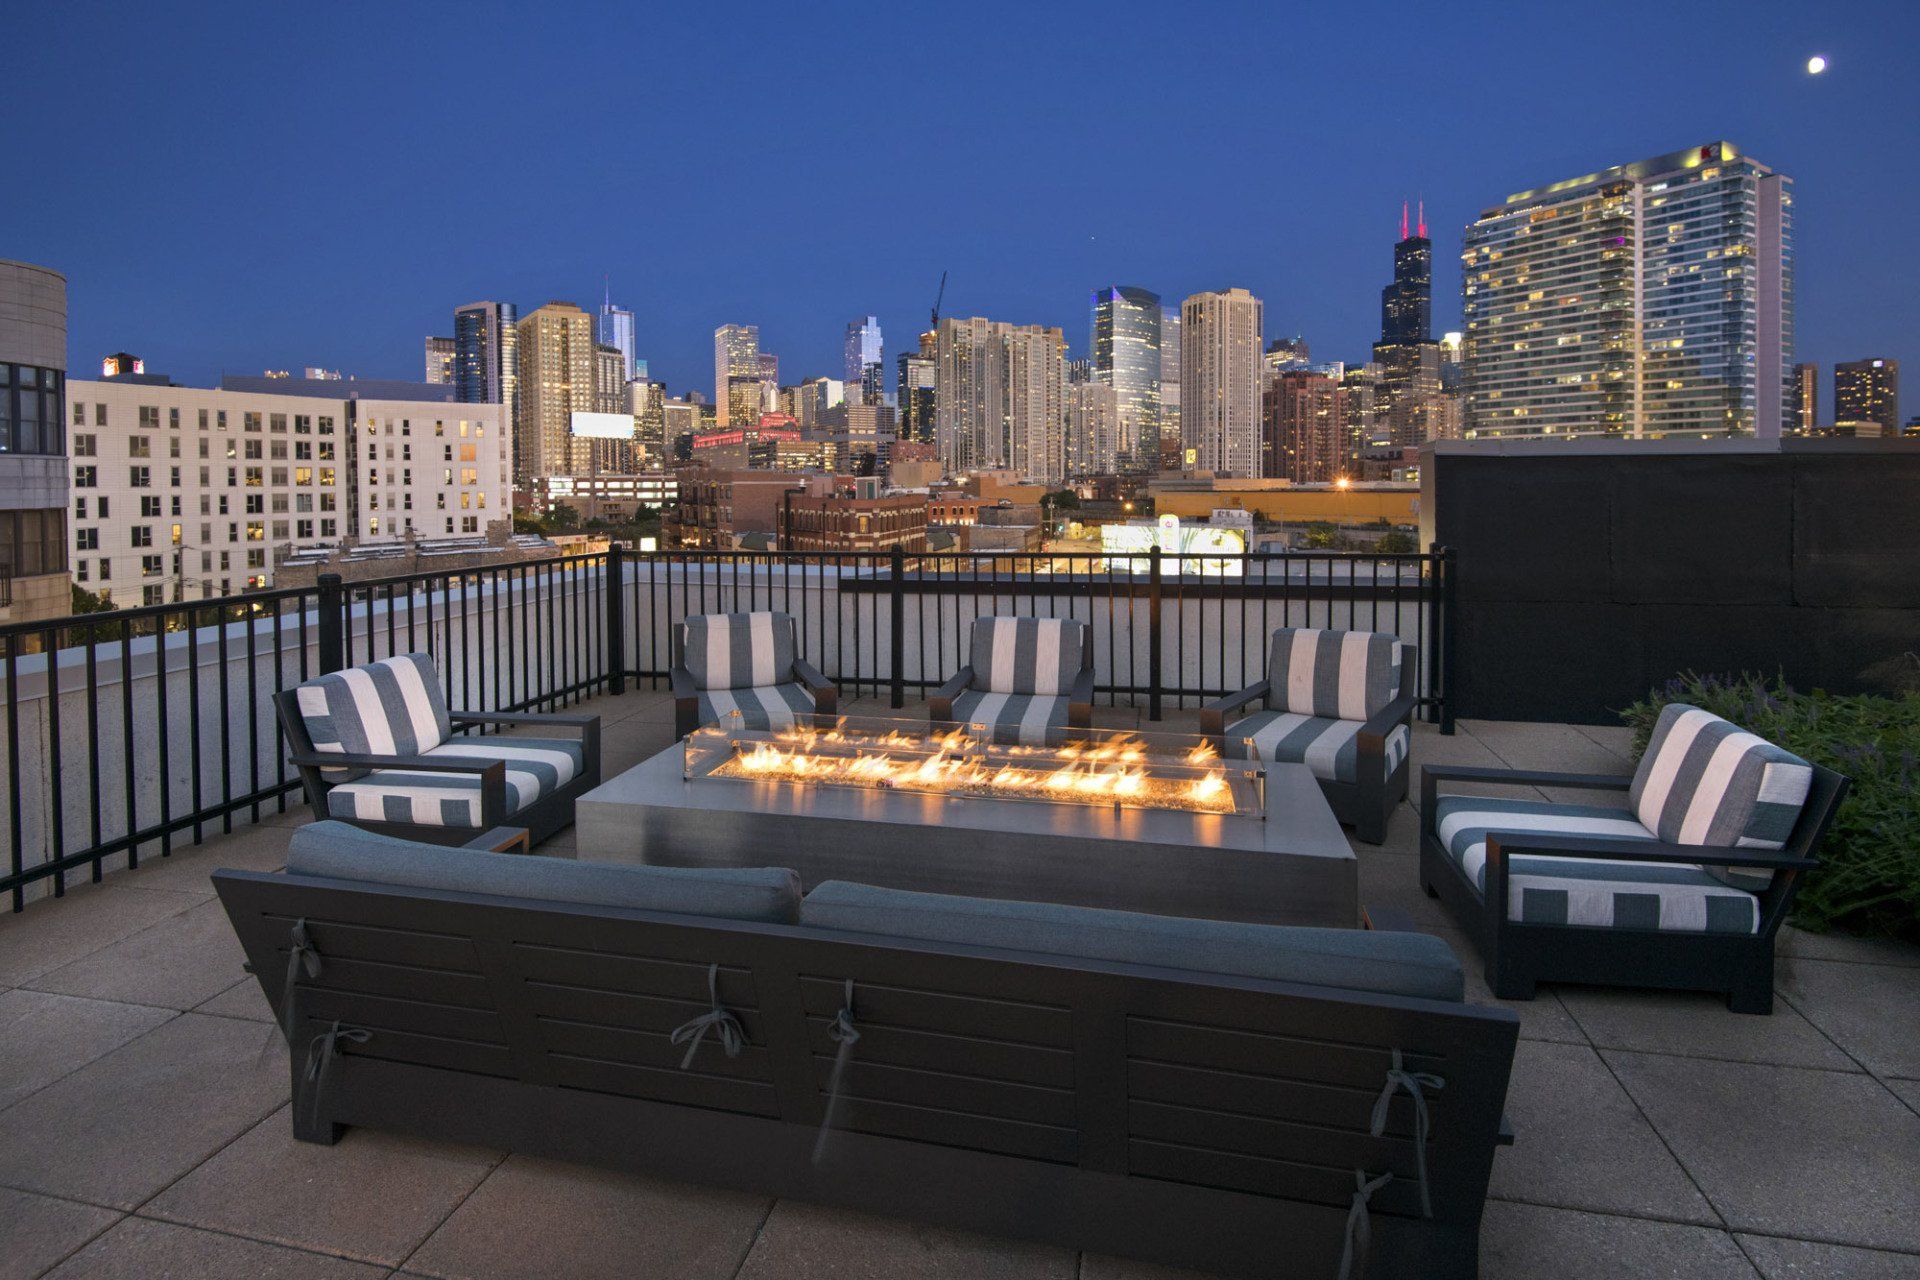 A fire pit on a patio with a city skyline in the background at Reside on Green Street.